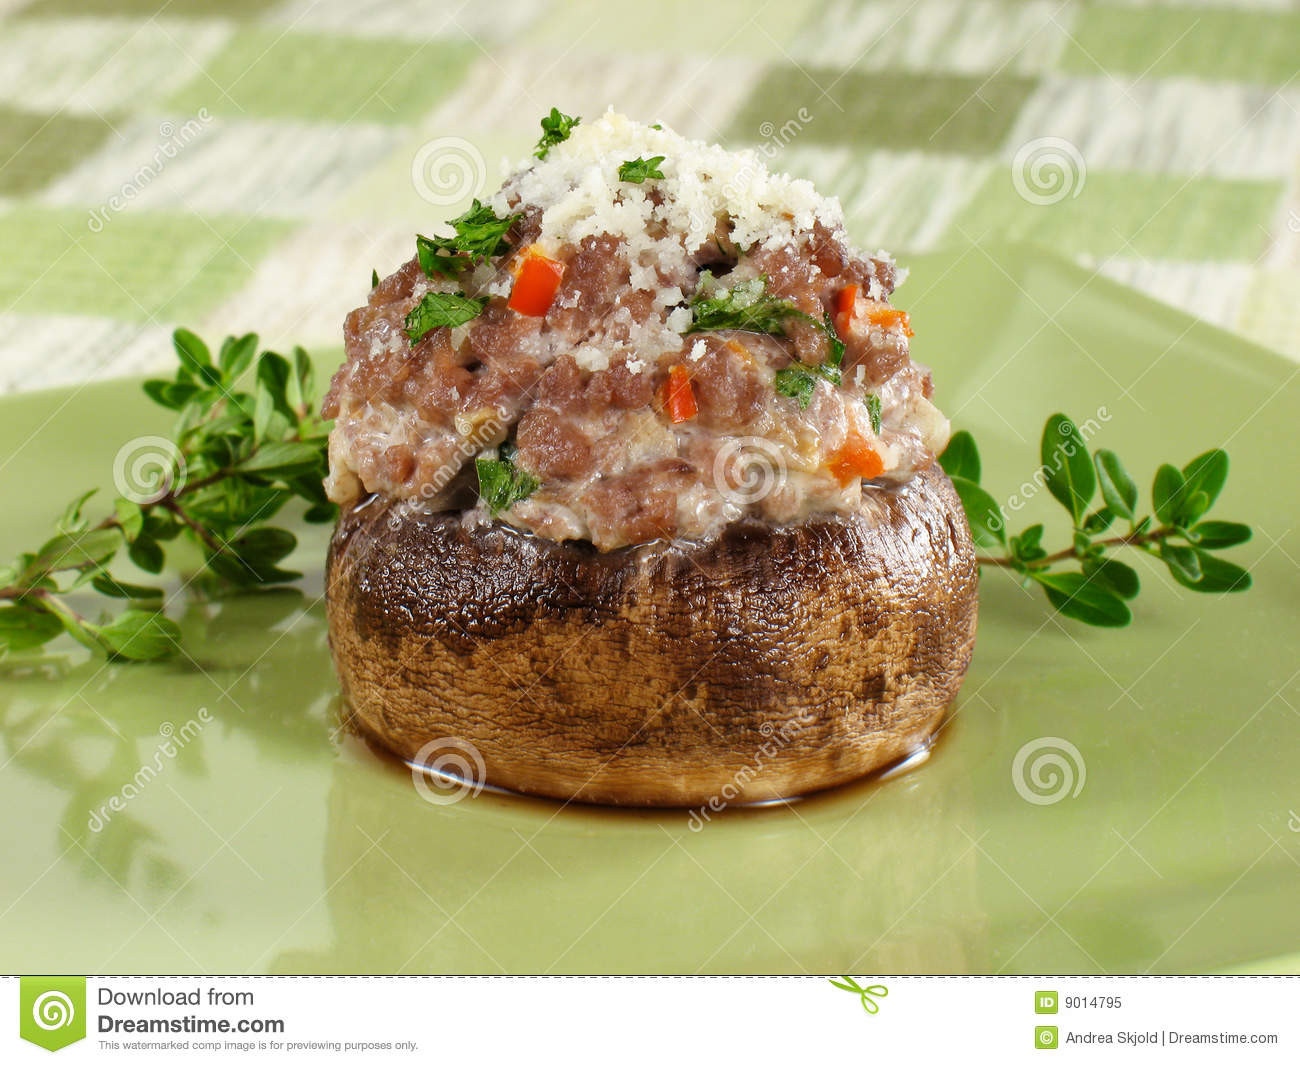 Tasty Stuffed Mushrooms
 Tasty Stuffed Mushroom stock image Image of bell parsley